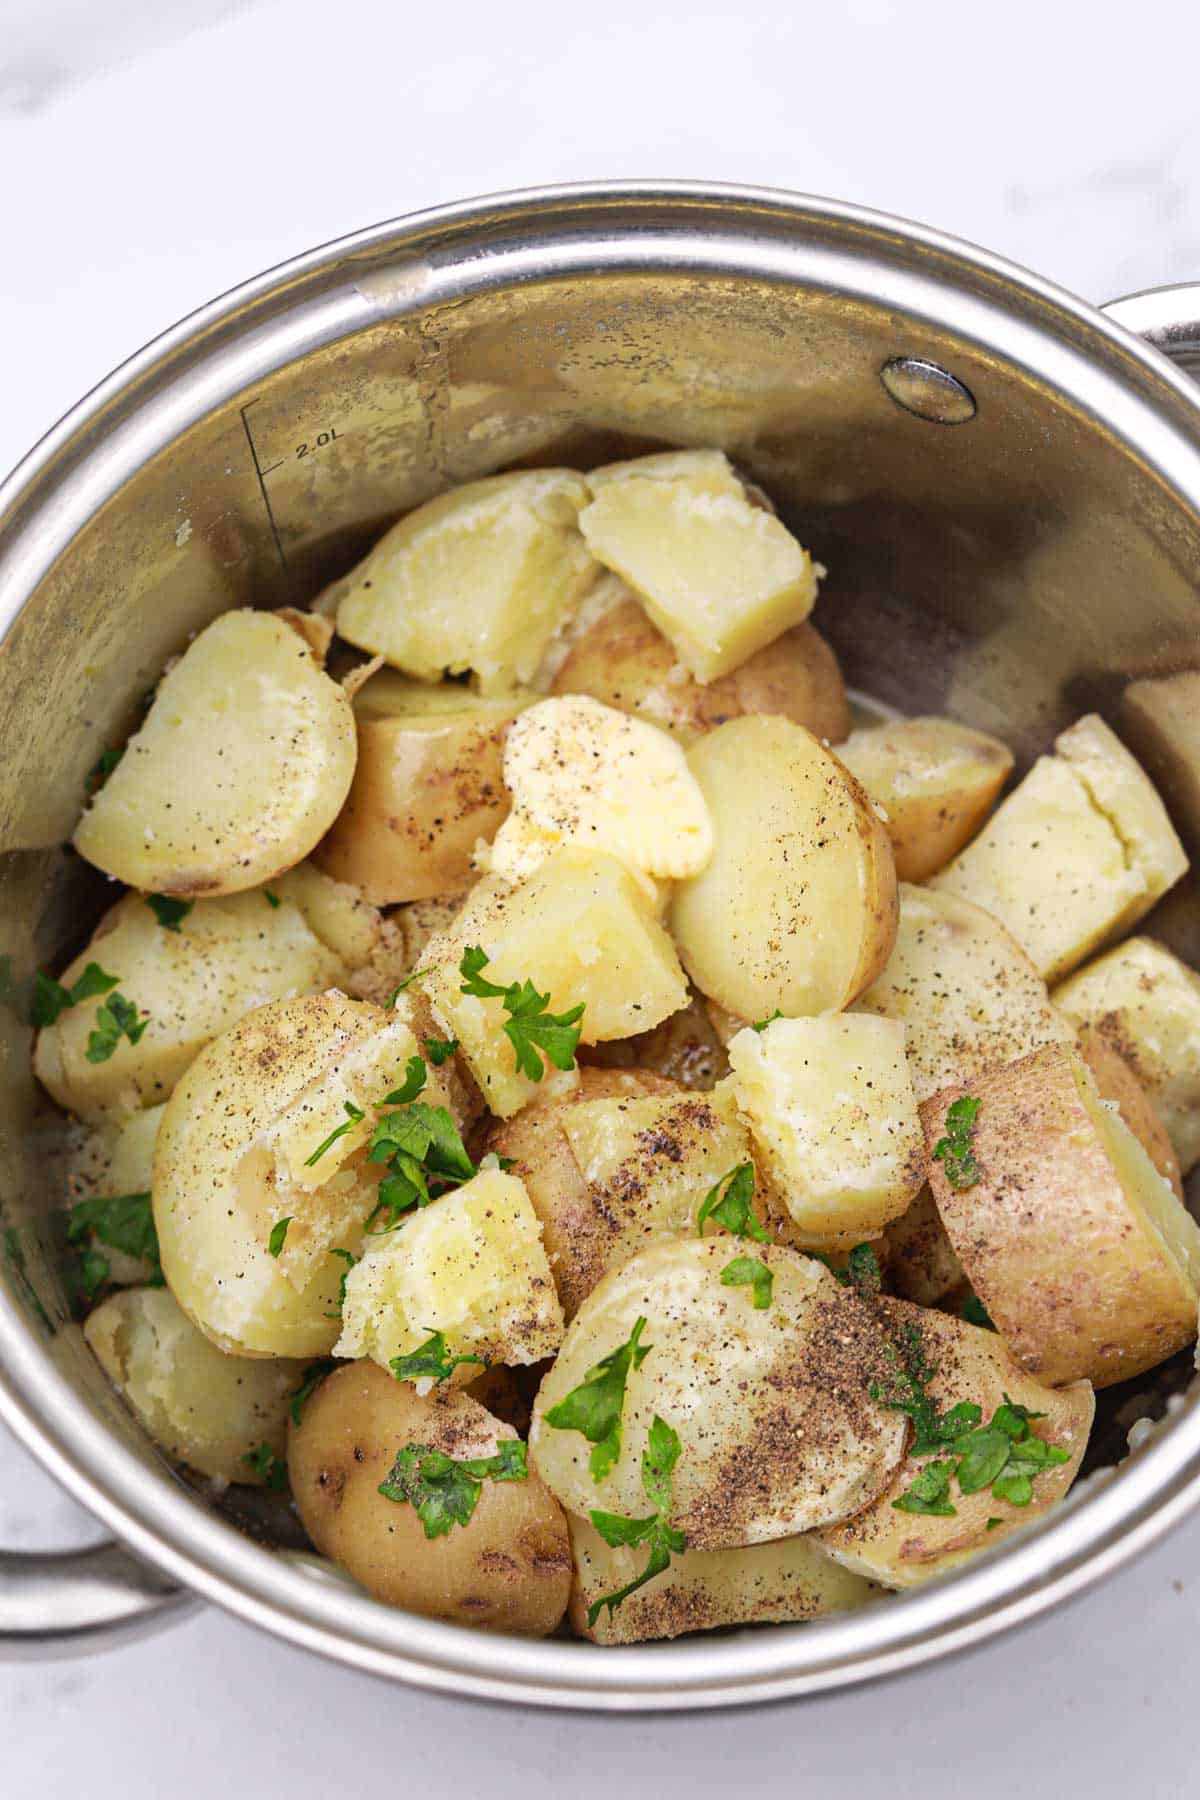 butter melting on the potatoes in the pot.